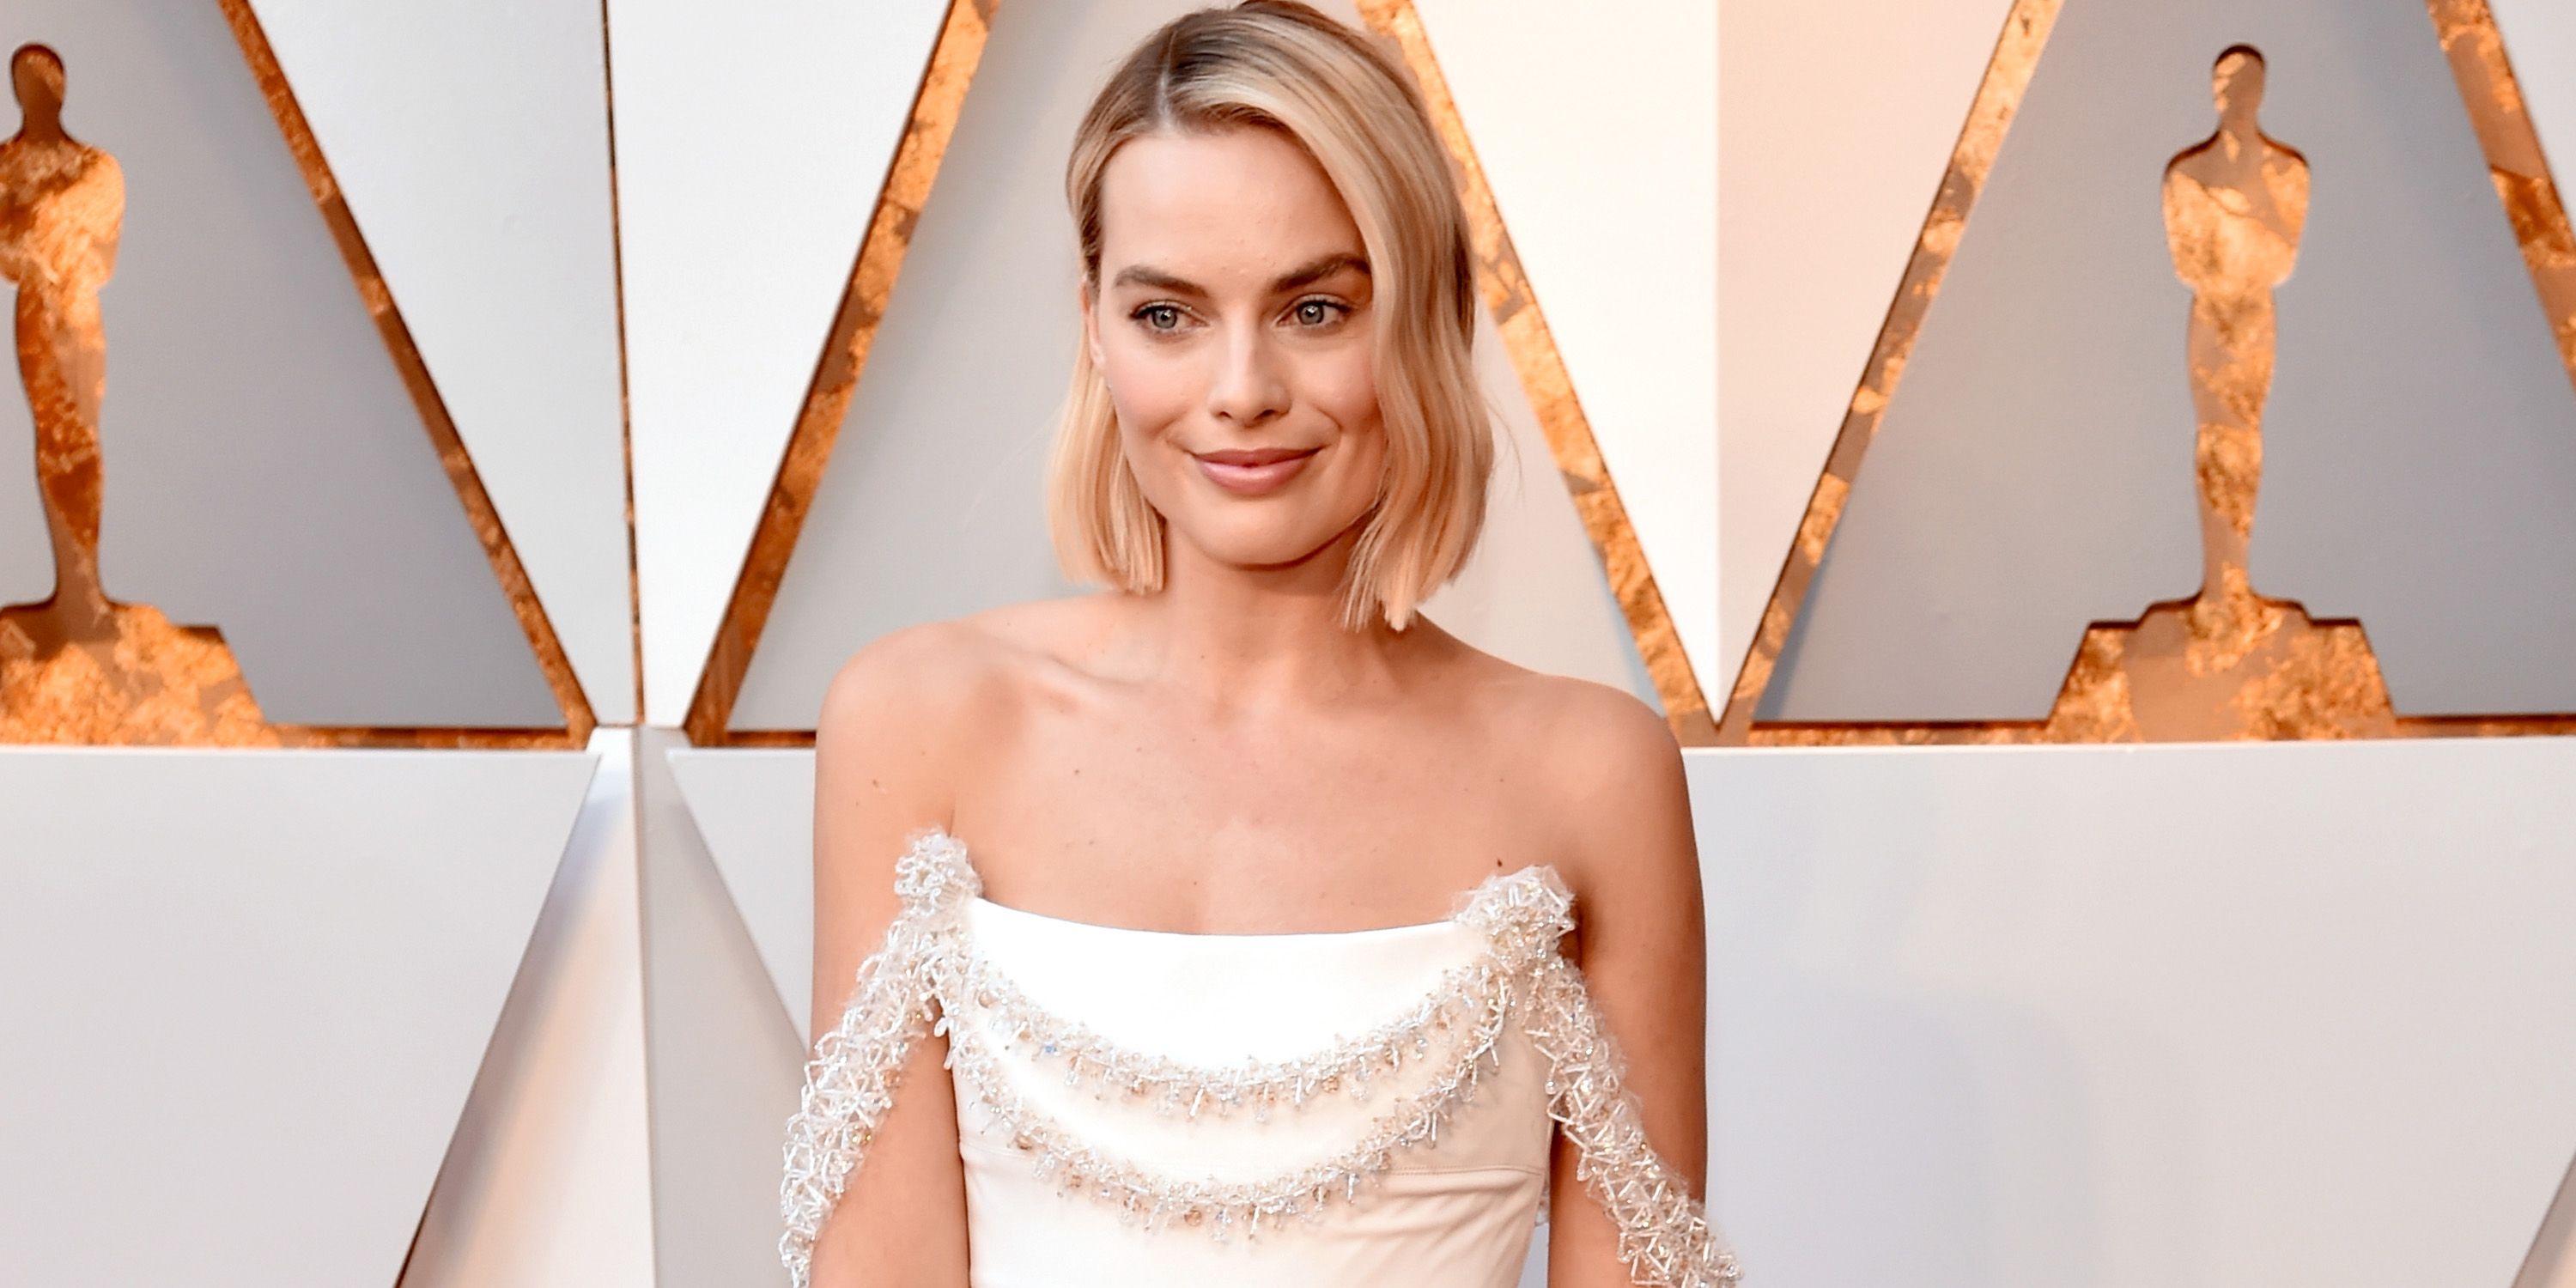 Oscars 2018 Red Carpet: What Margot Robbie Will Be Wearing